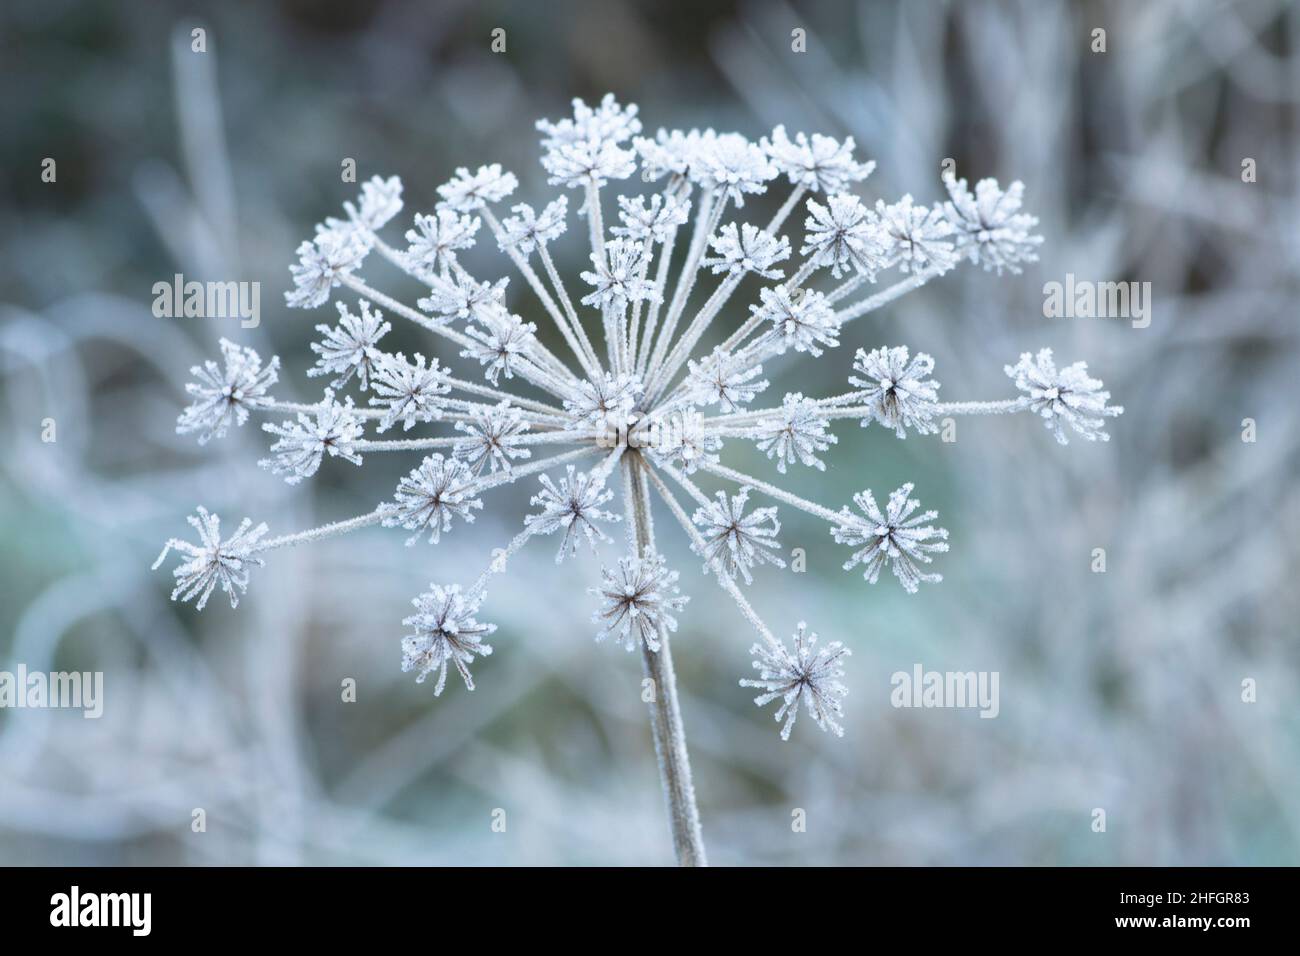 Common Hogweed, Heracleum sphondylium, Cow parsnip, flower head covered with frost in winter January, Sussex, UK Stock Photo